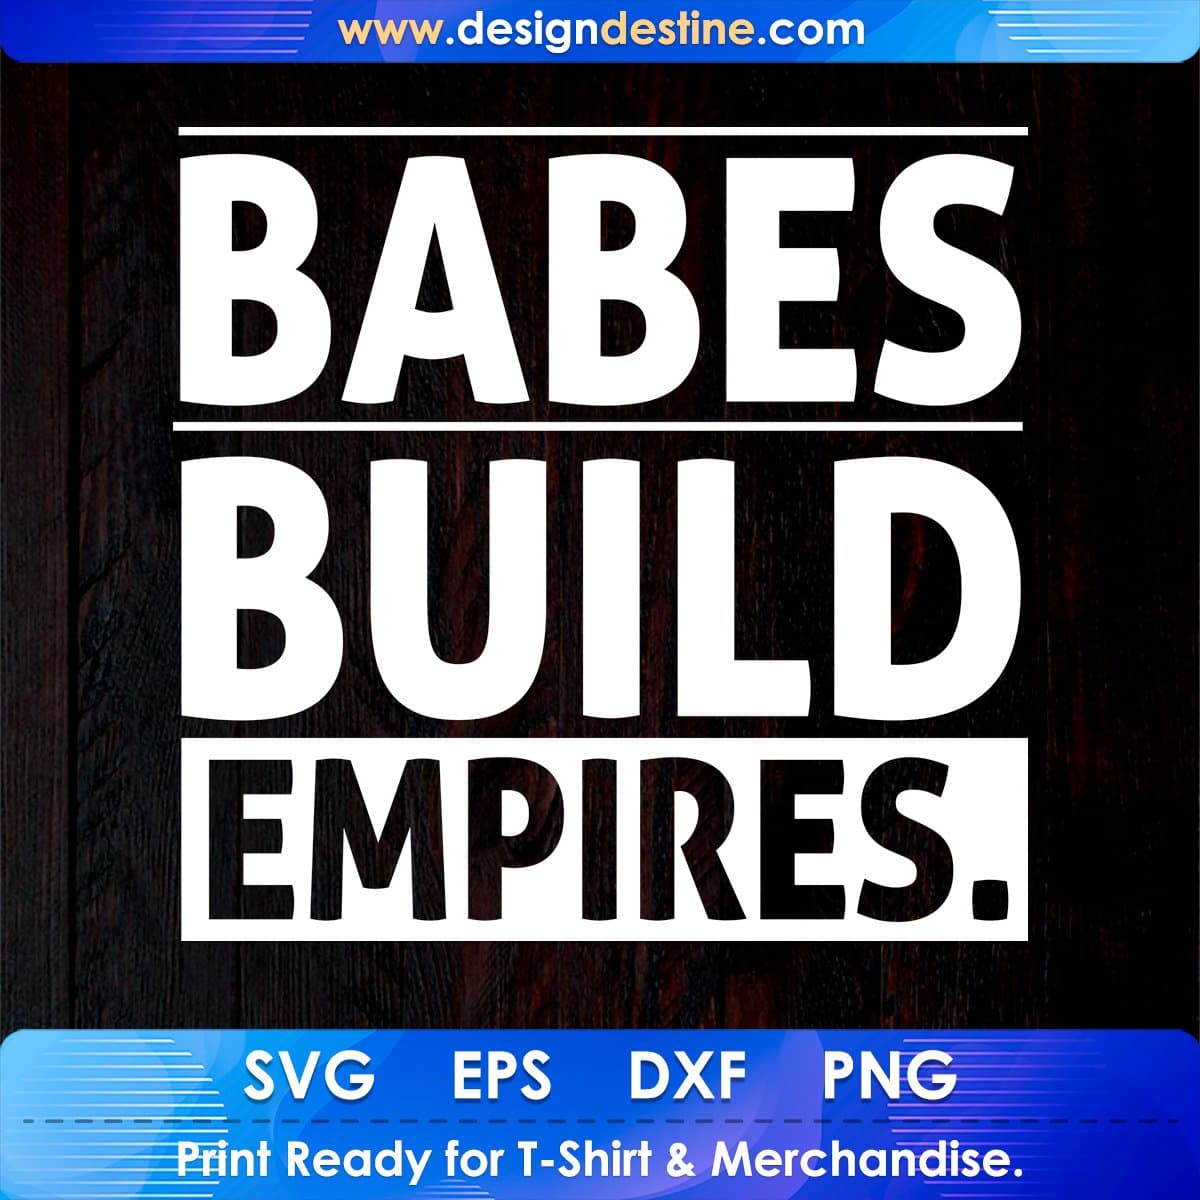 Babes Build Empires T shirt Design In Svg Cutting Printable Files